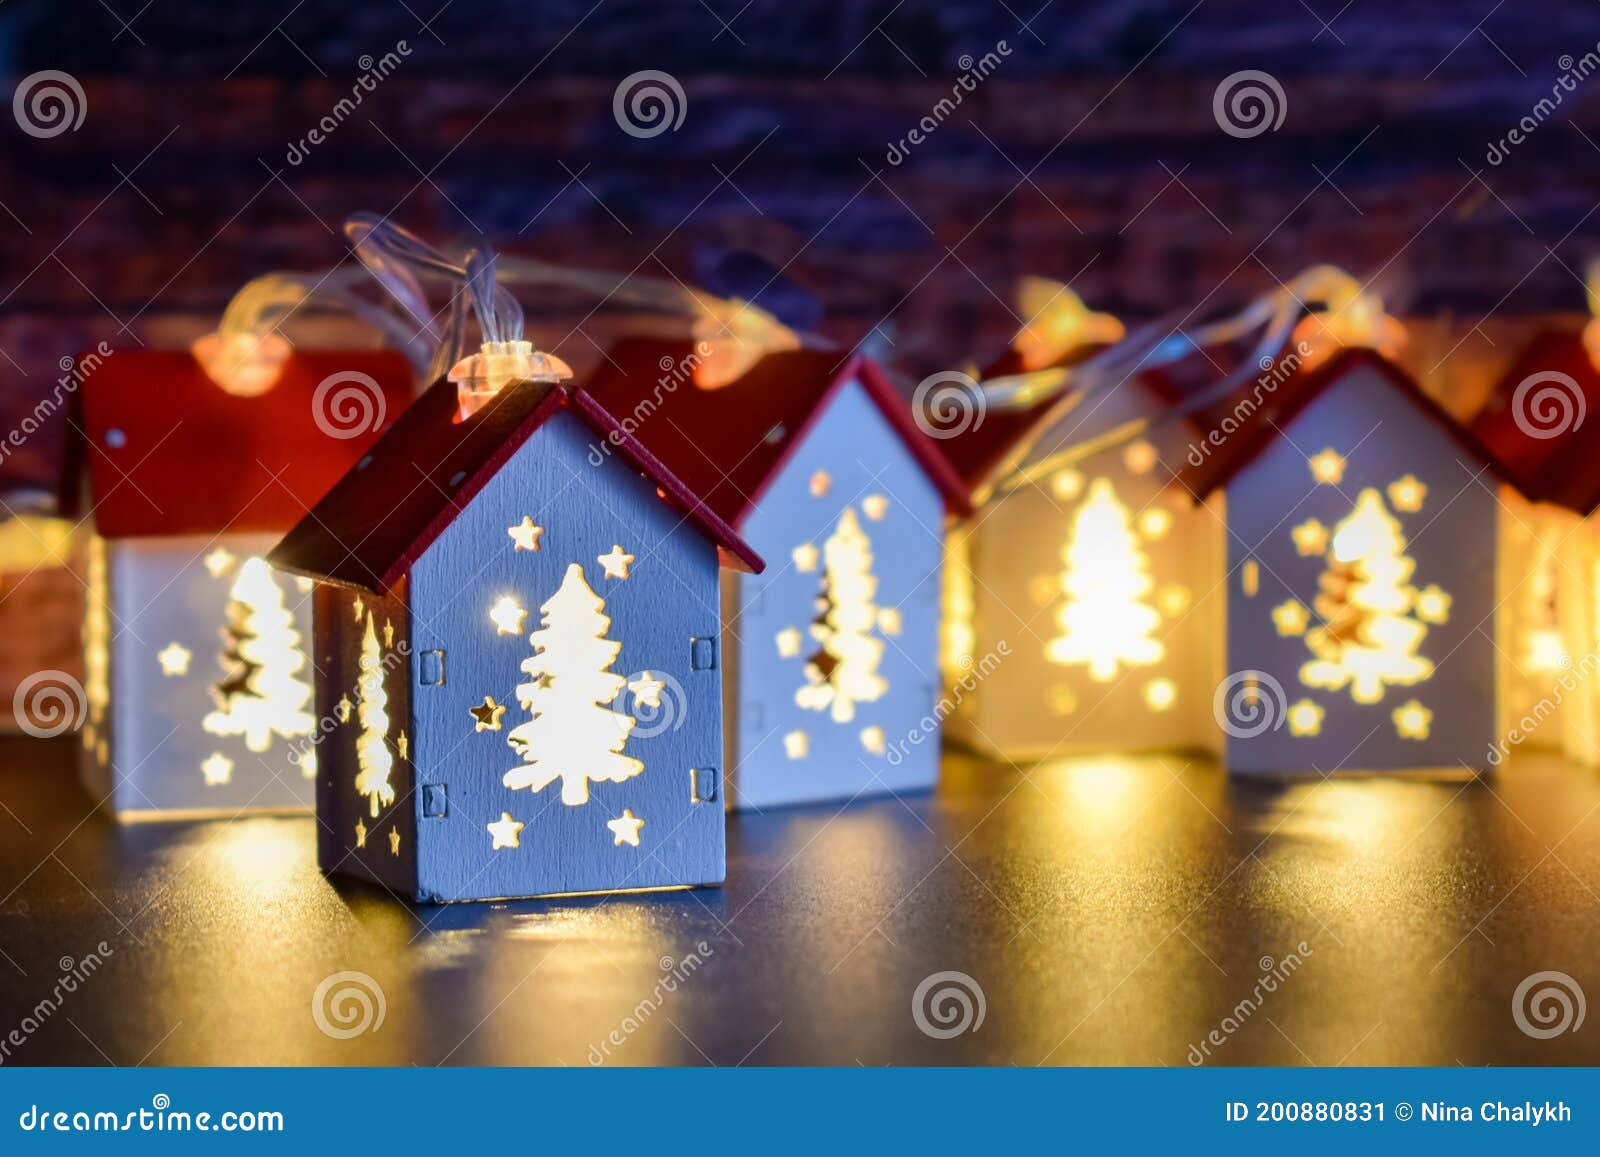 Small Christmas Houses with Christmas Tree-shaped Windows that Glow ...